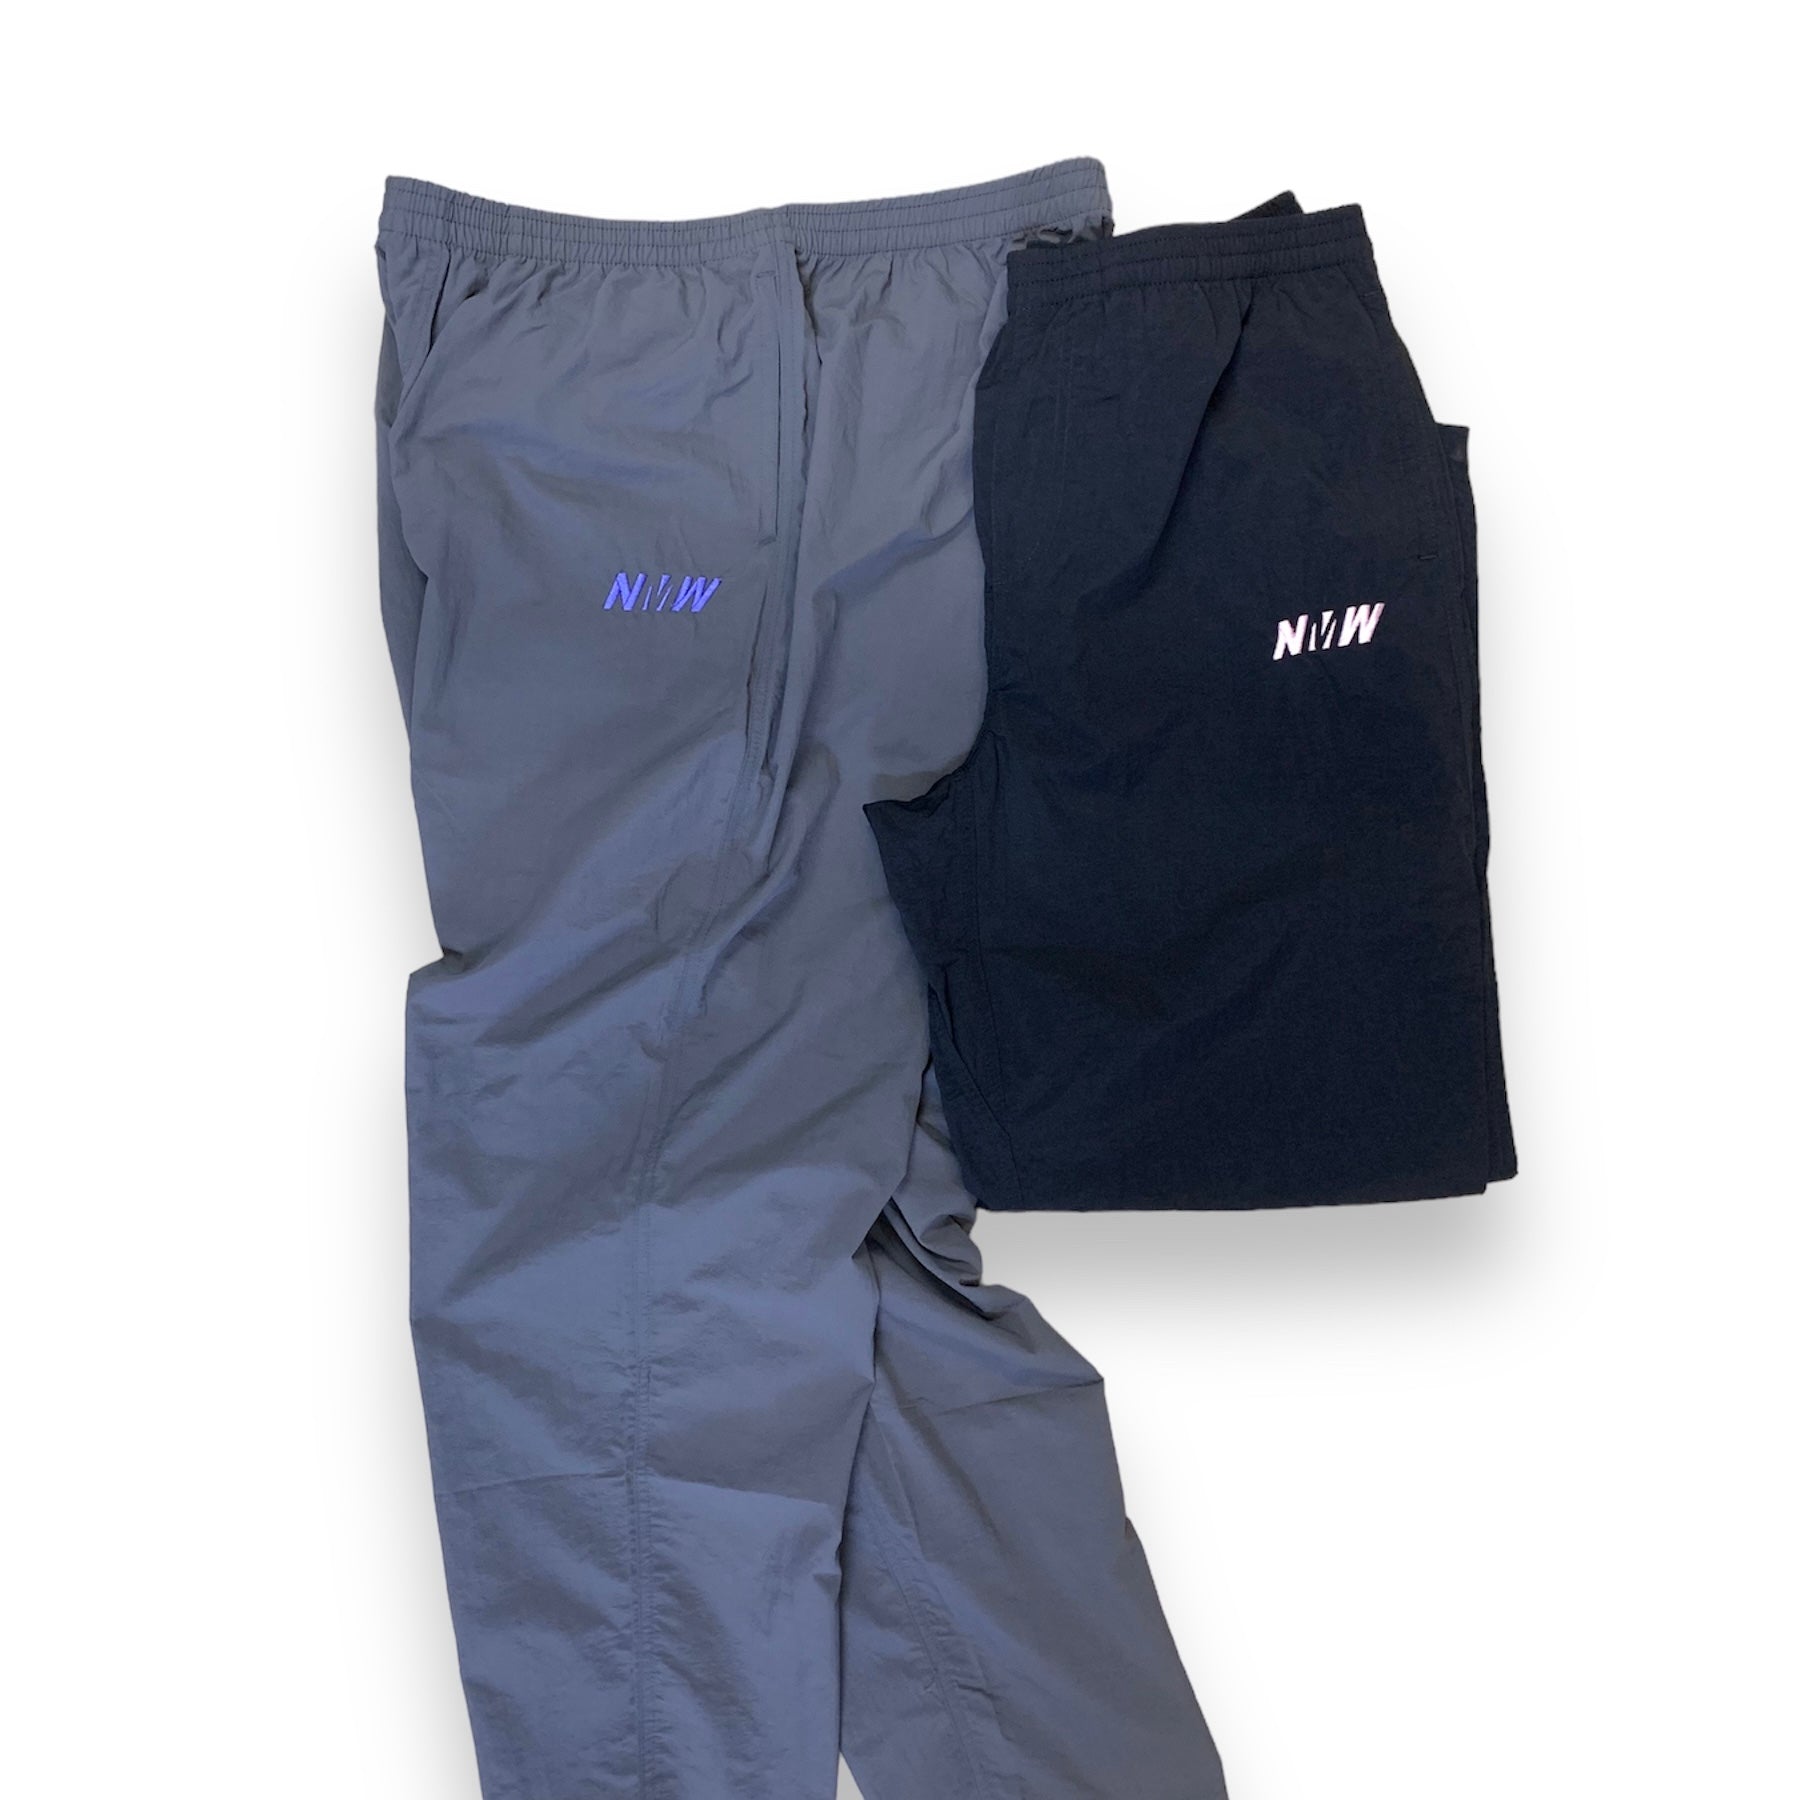 NMW COMFORT PANTS – NERDY MOUNTAIN WORKS